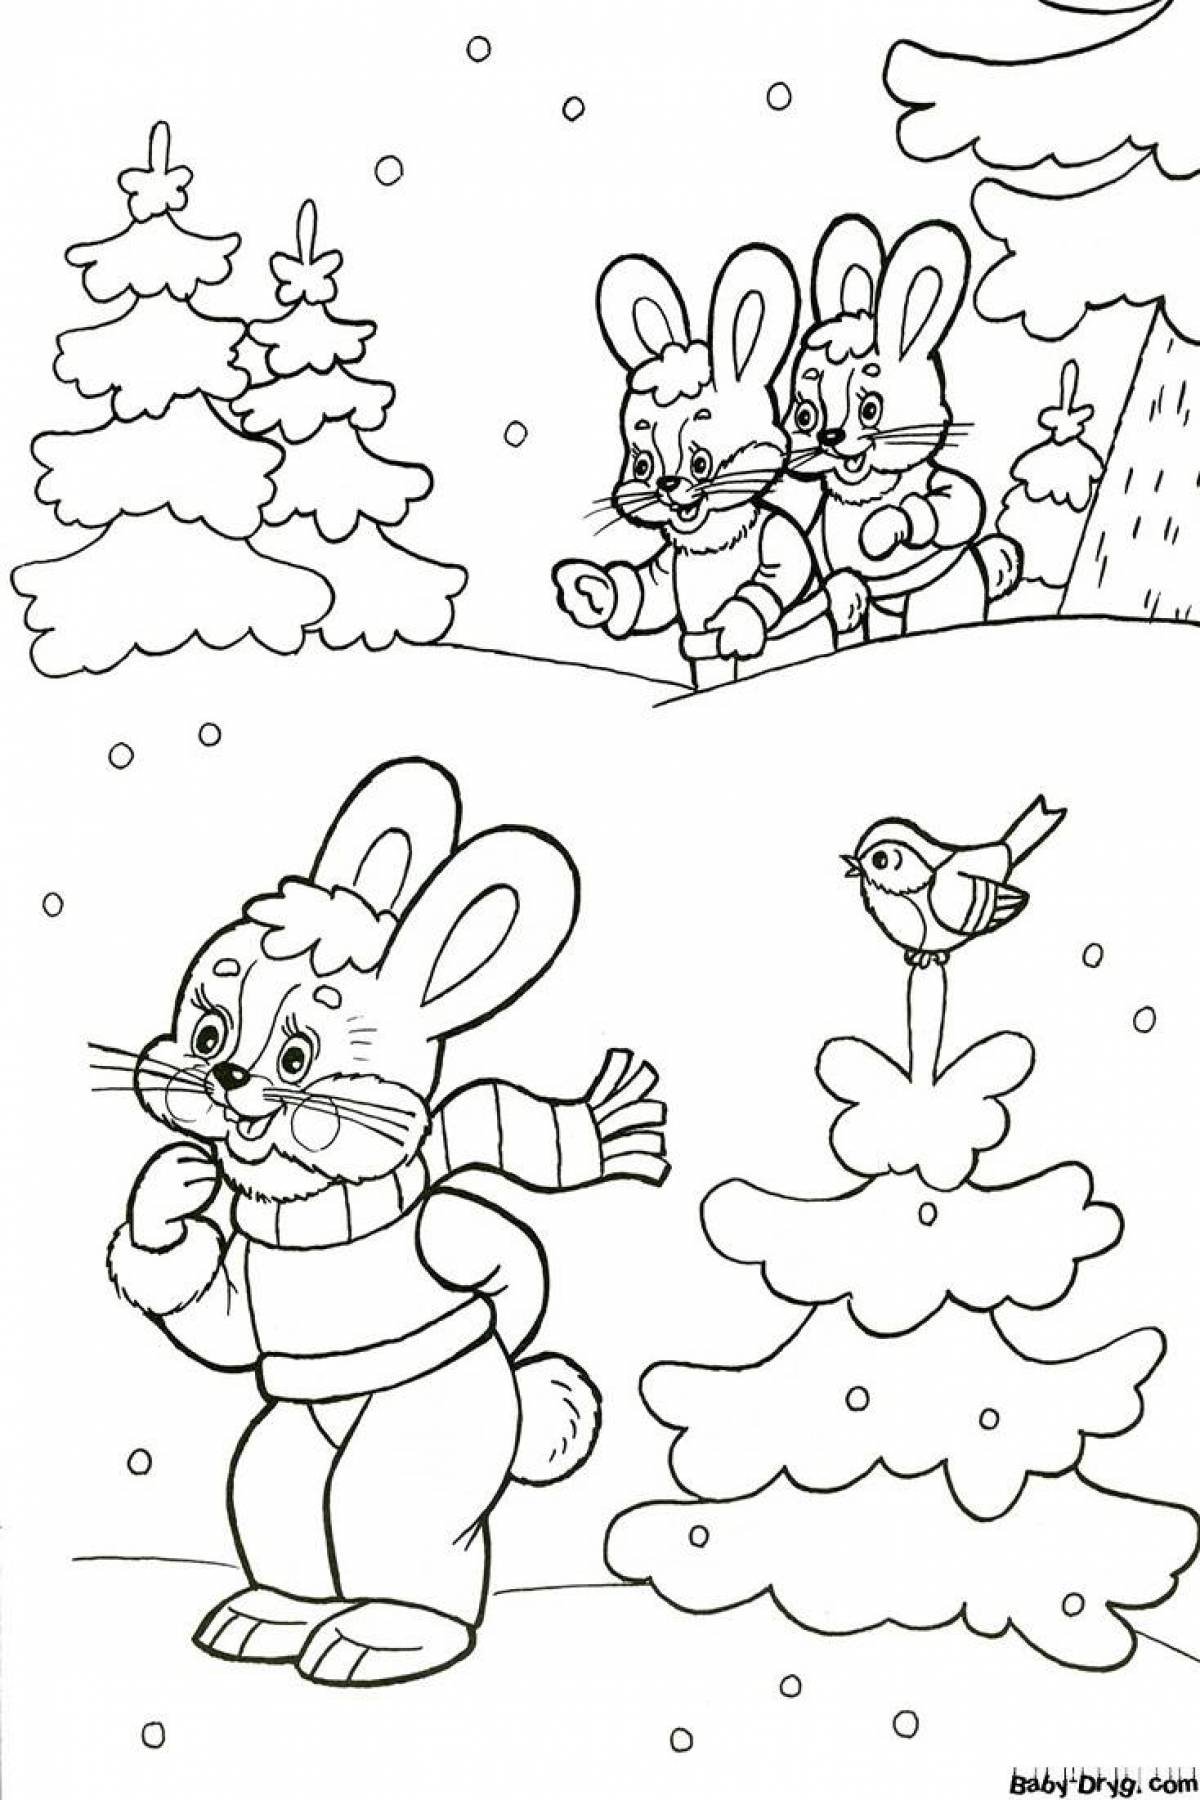 Delightful winter coloring book for children 5-6 years old